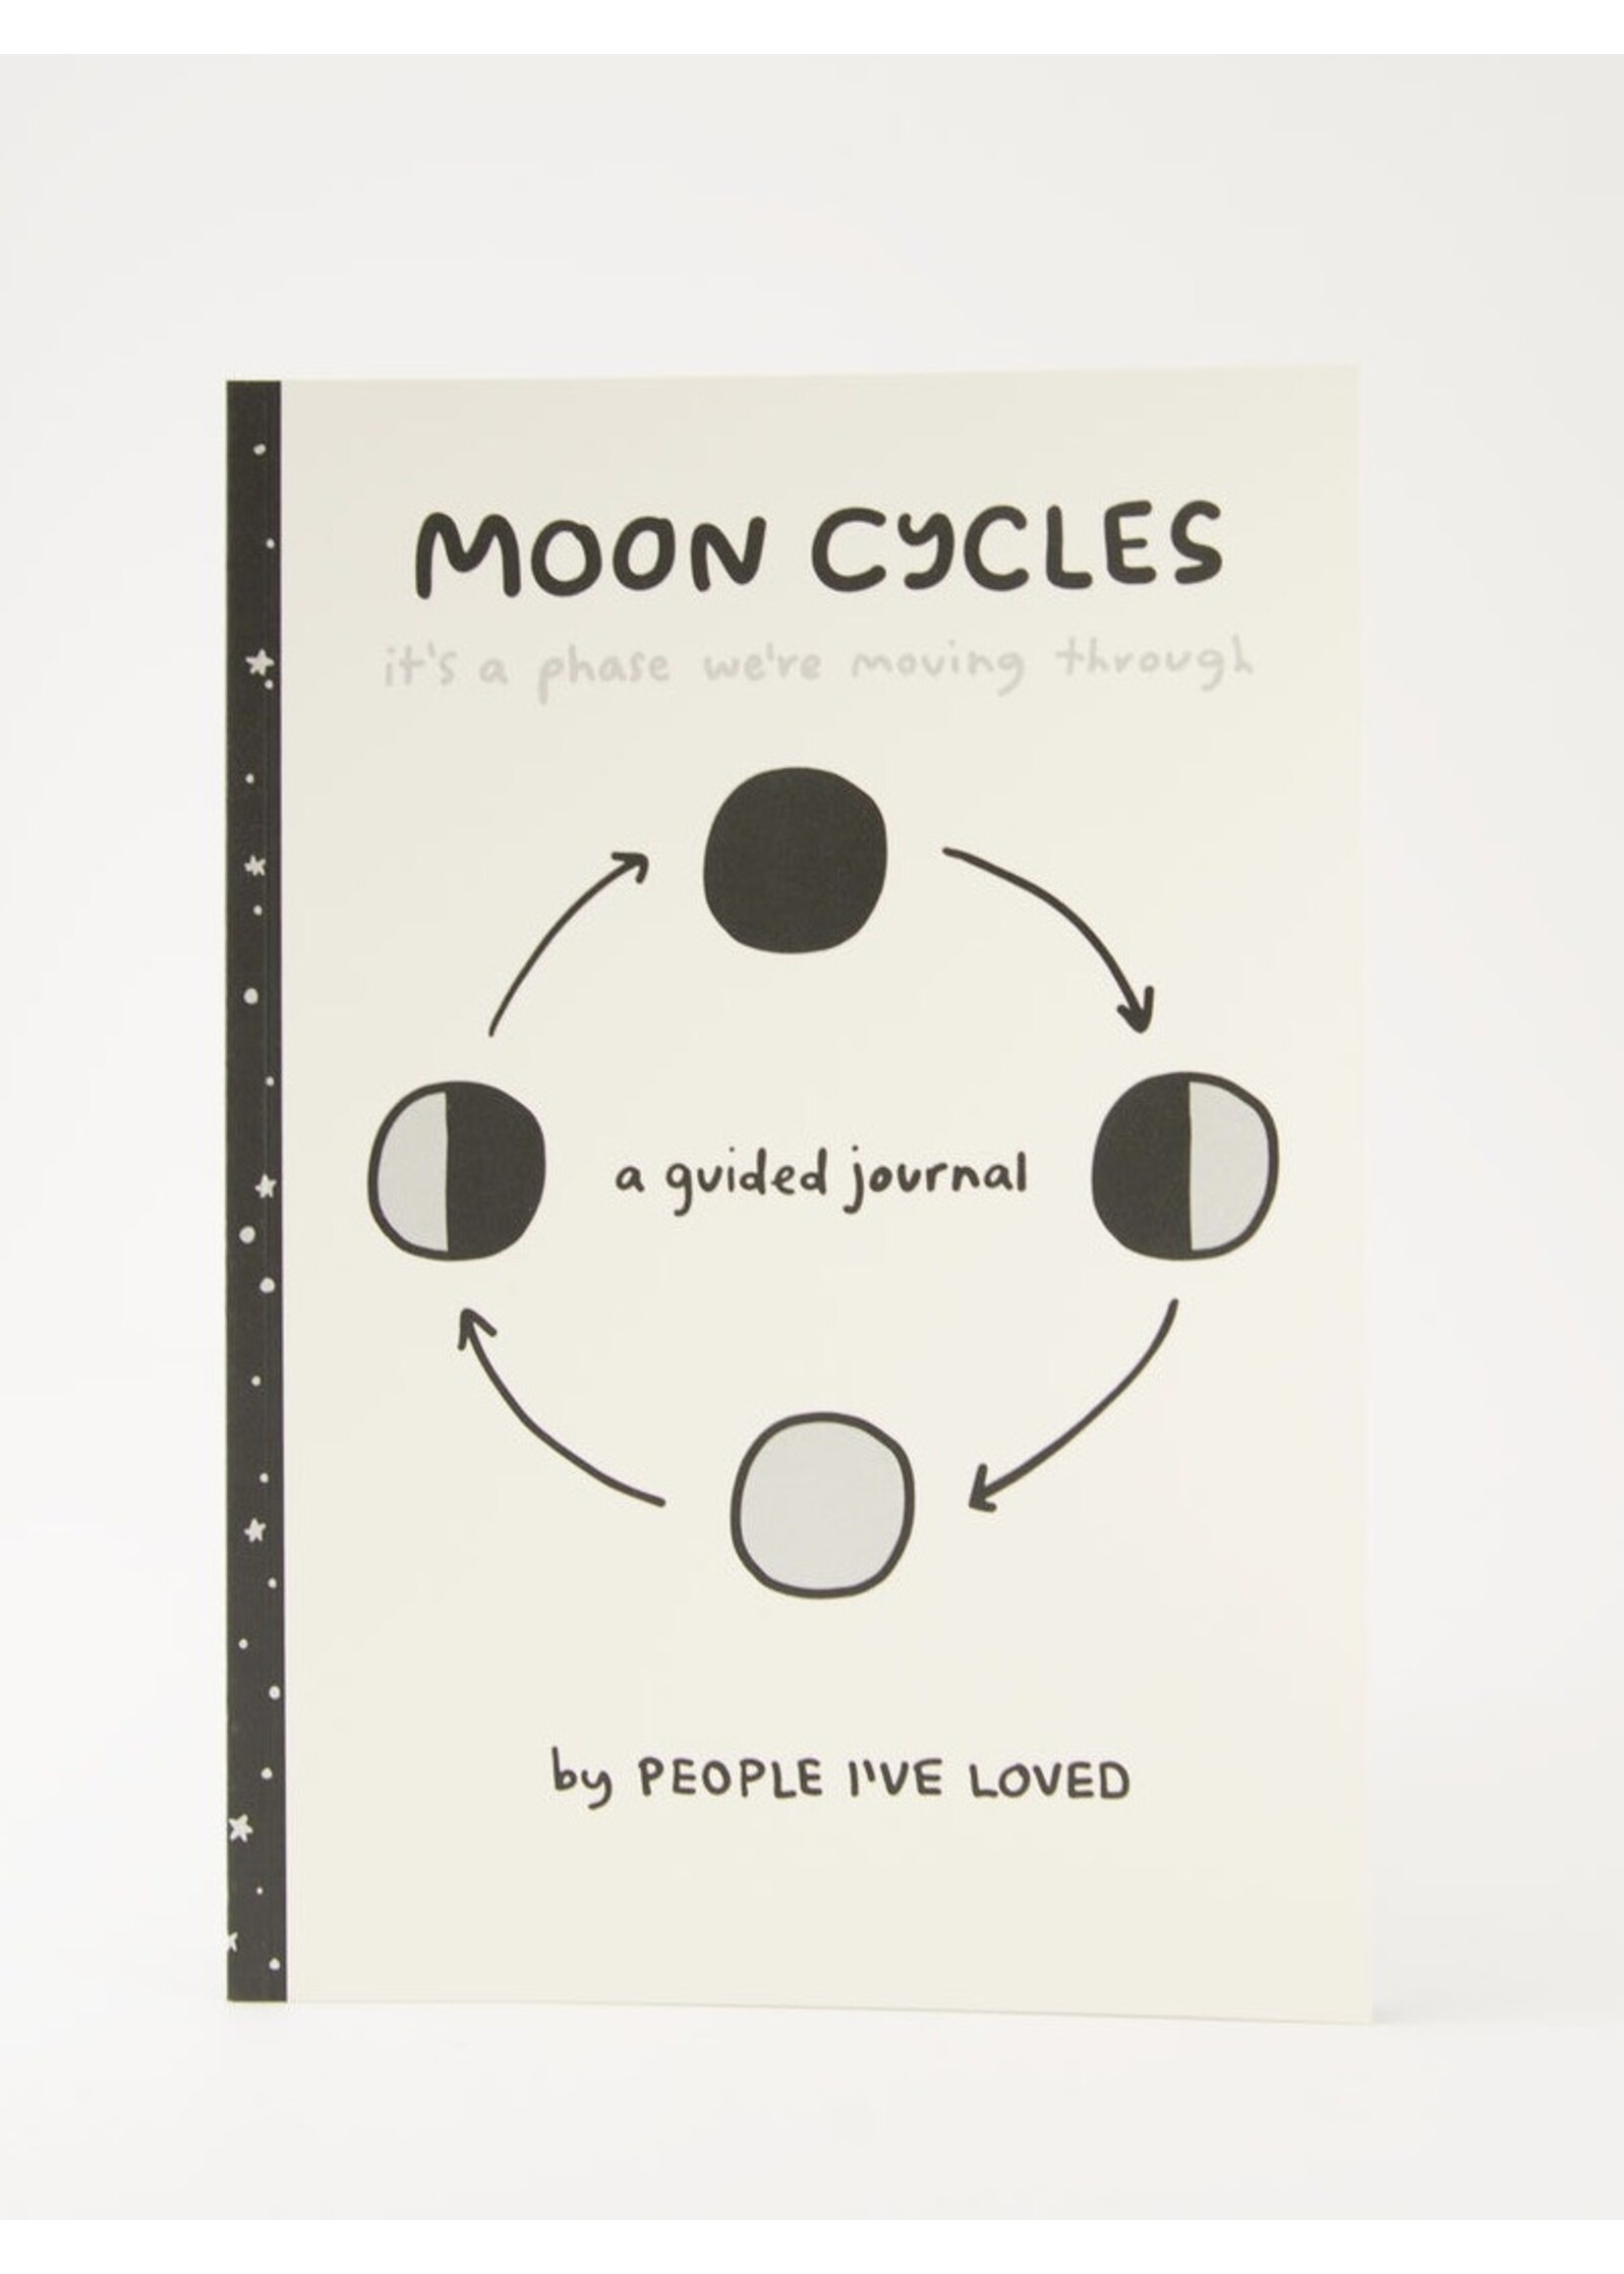 People I've Loved Notebook "Moon Cycles Guided Journal" by People I've Loved